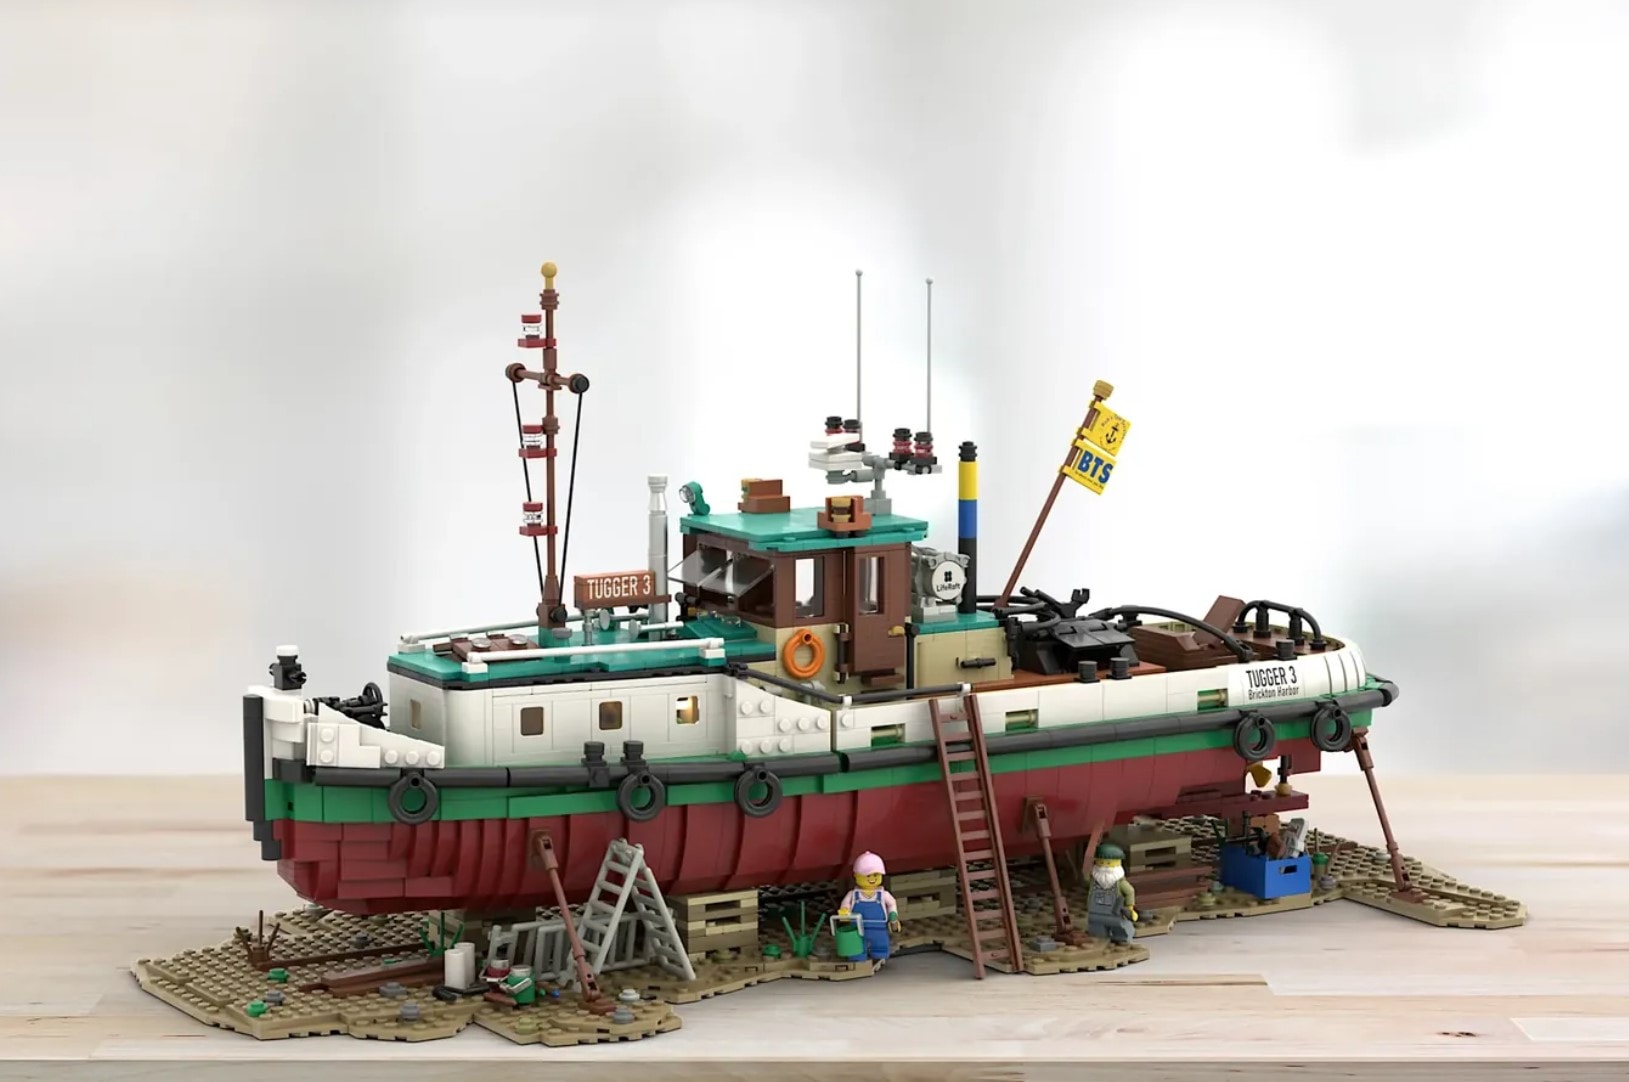 LEGO Ideas Tugboat Will Let You Live Your Sea Dog Dreams - autoevolution